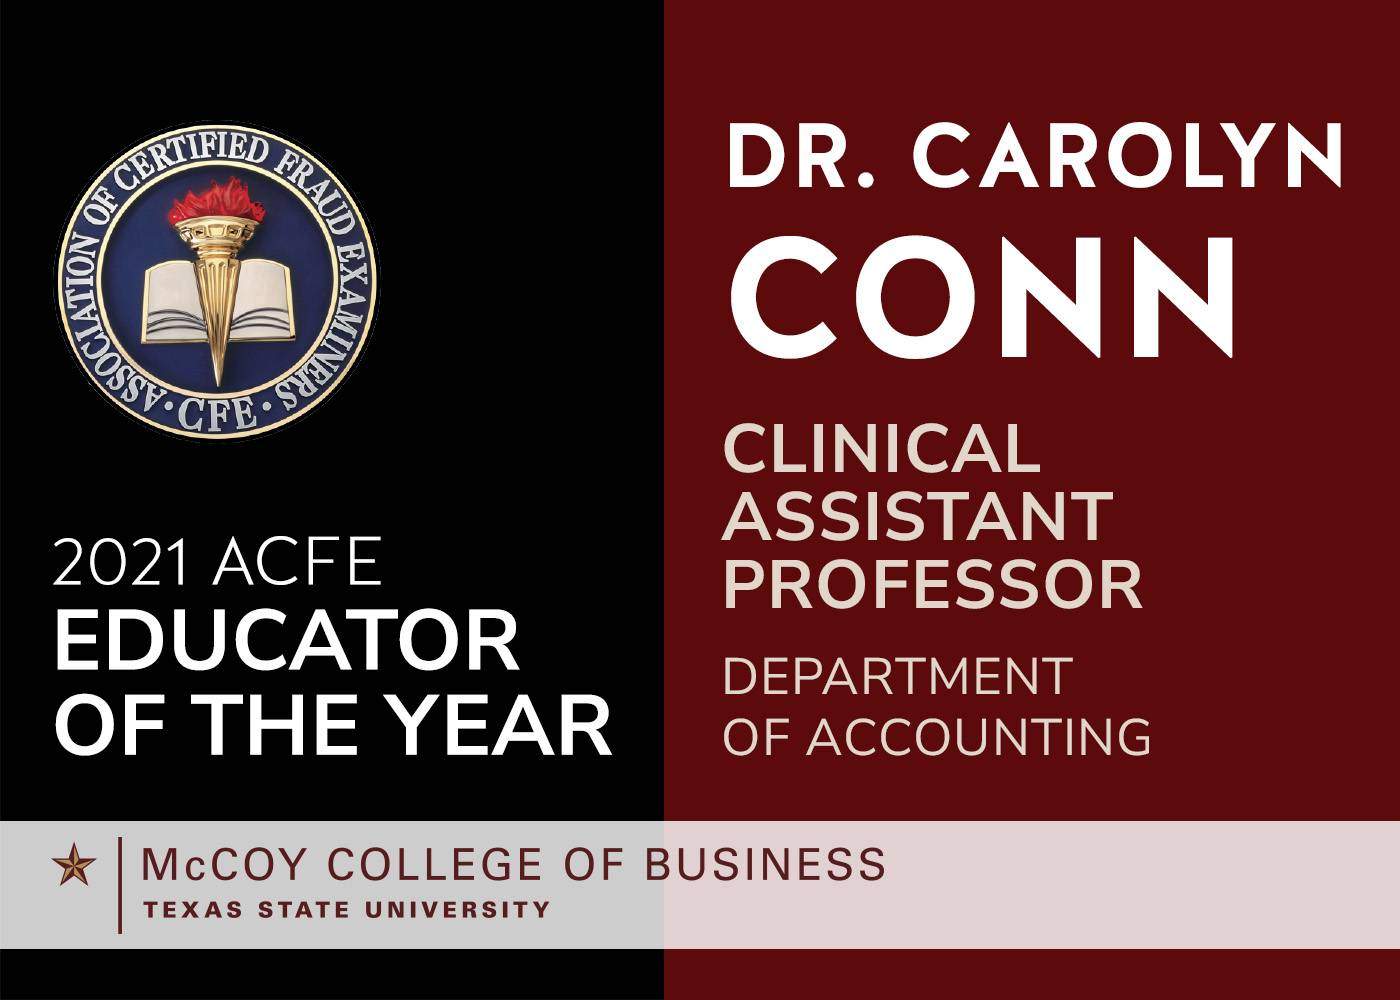 The Association of Certified Fraud Examiners (ACFE) has chosen Dr. Carolyn Conn as its 2021 Educator of the Year.